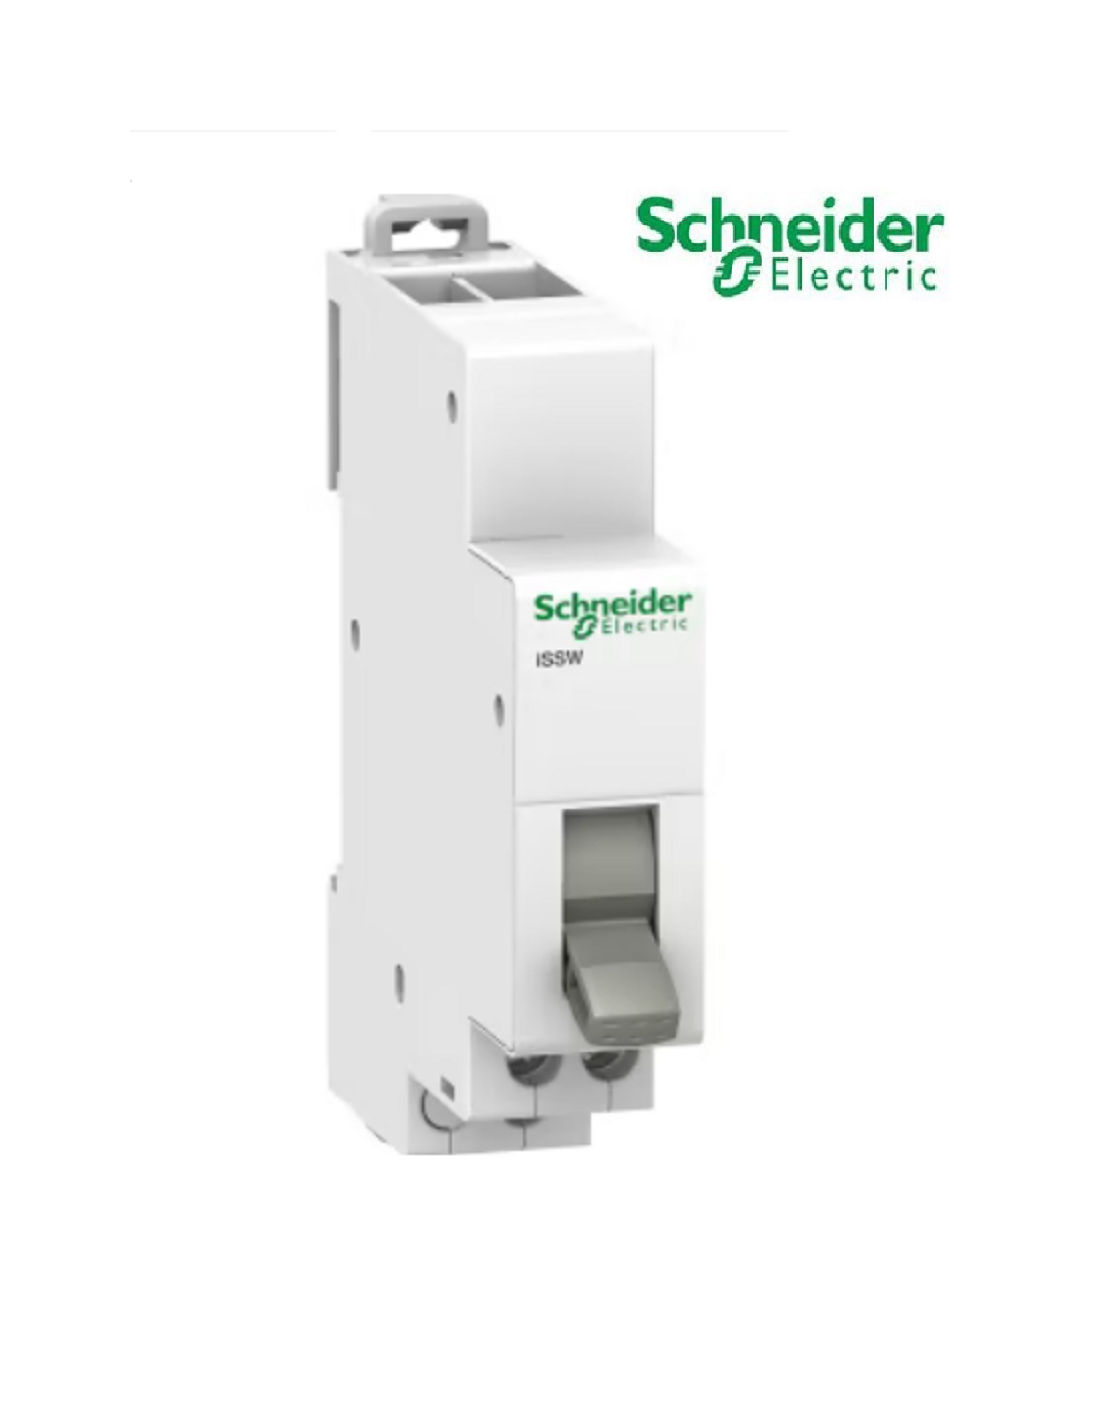 Commutateur 3 positions 20 A - 1 contact inverseur O/F -Acti9, iSSW -  A9E18073 Schneider